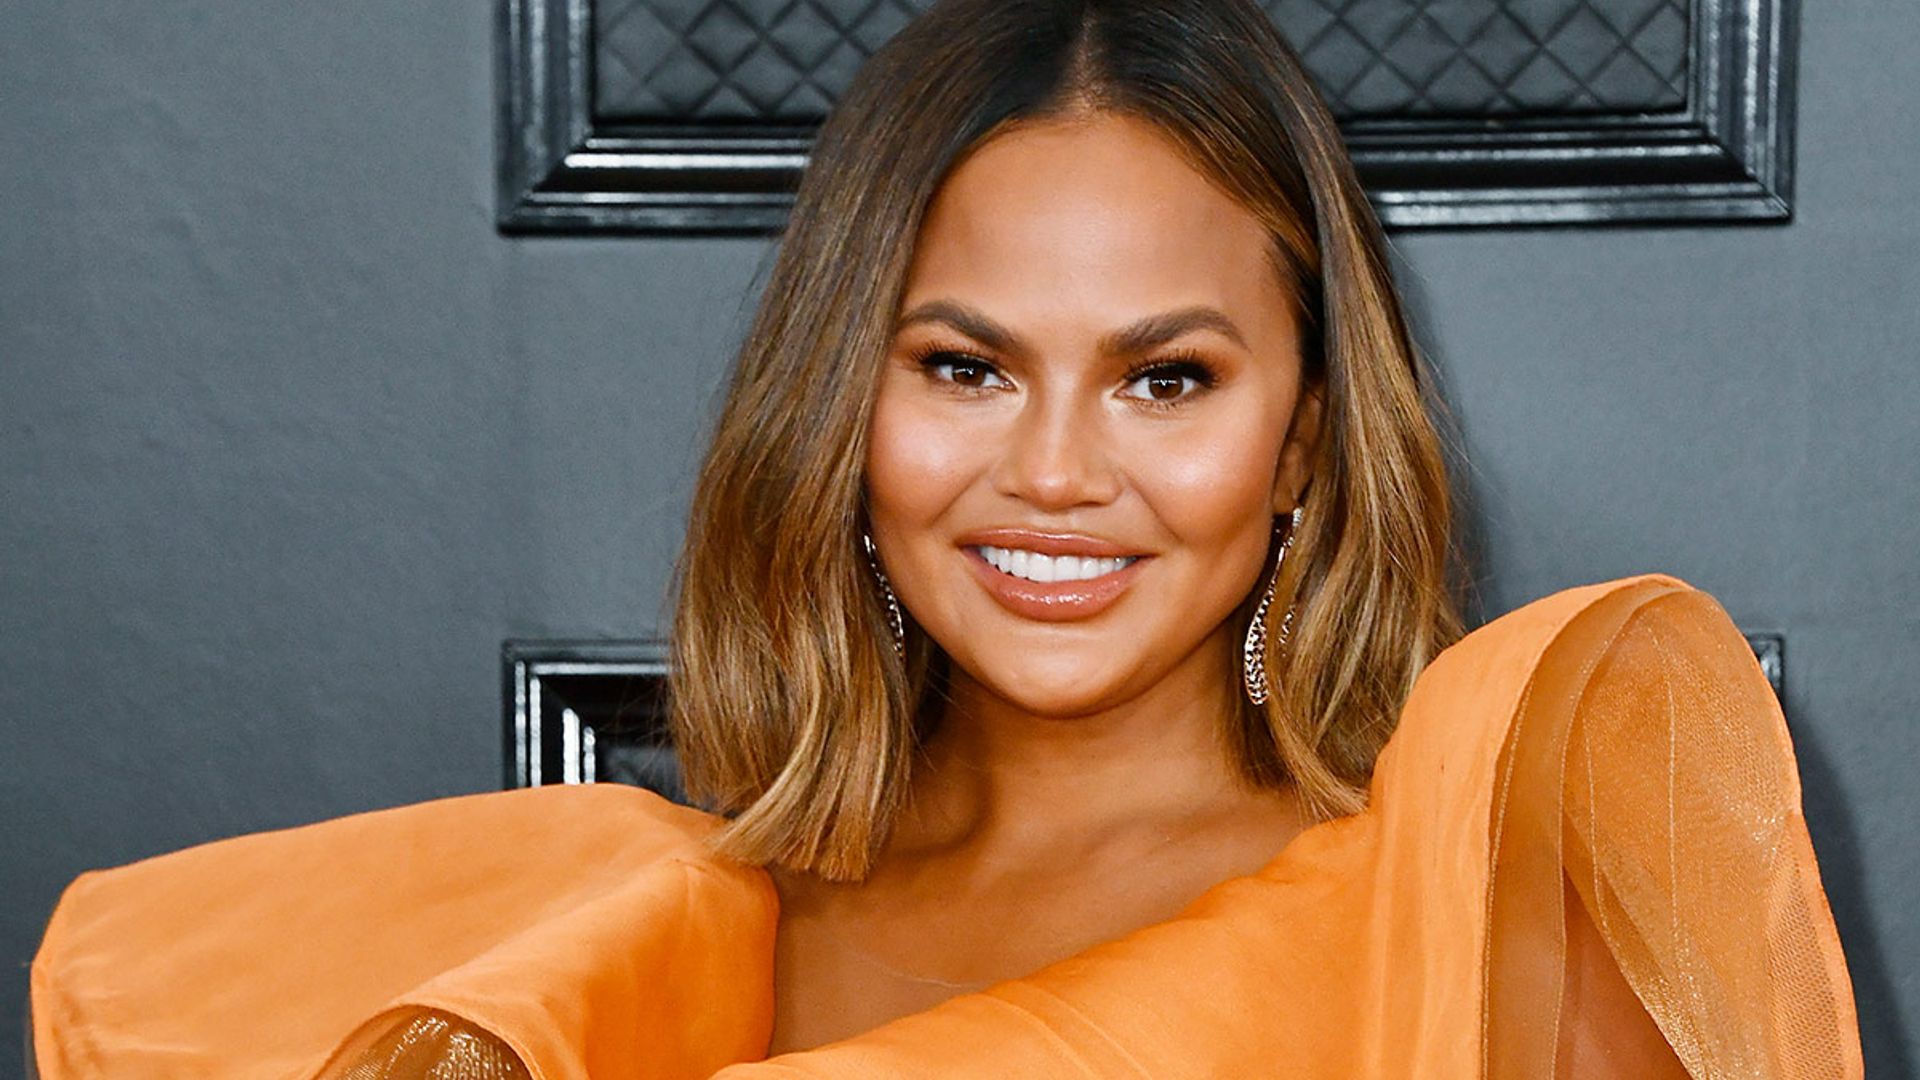 Chrissy Teigen melts hearts with adorable ballet photo of her daughter